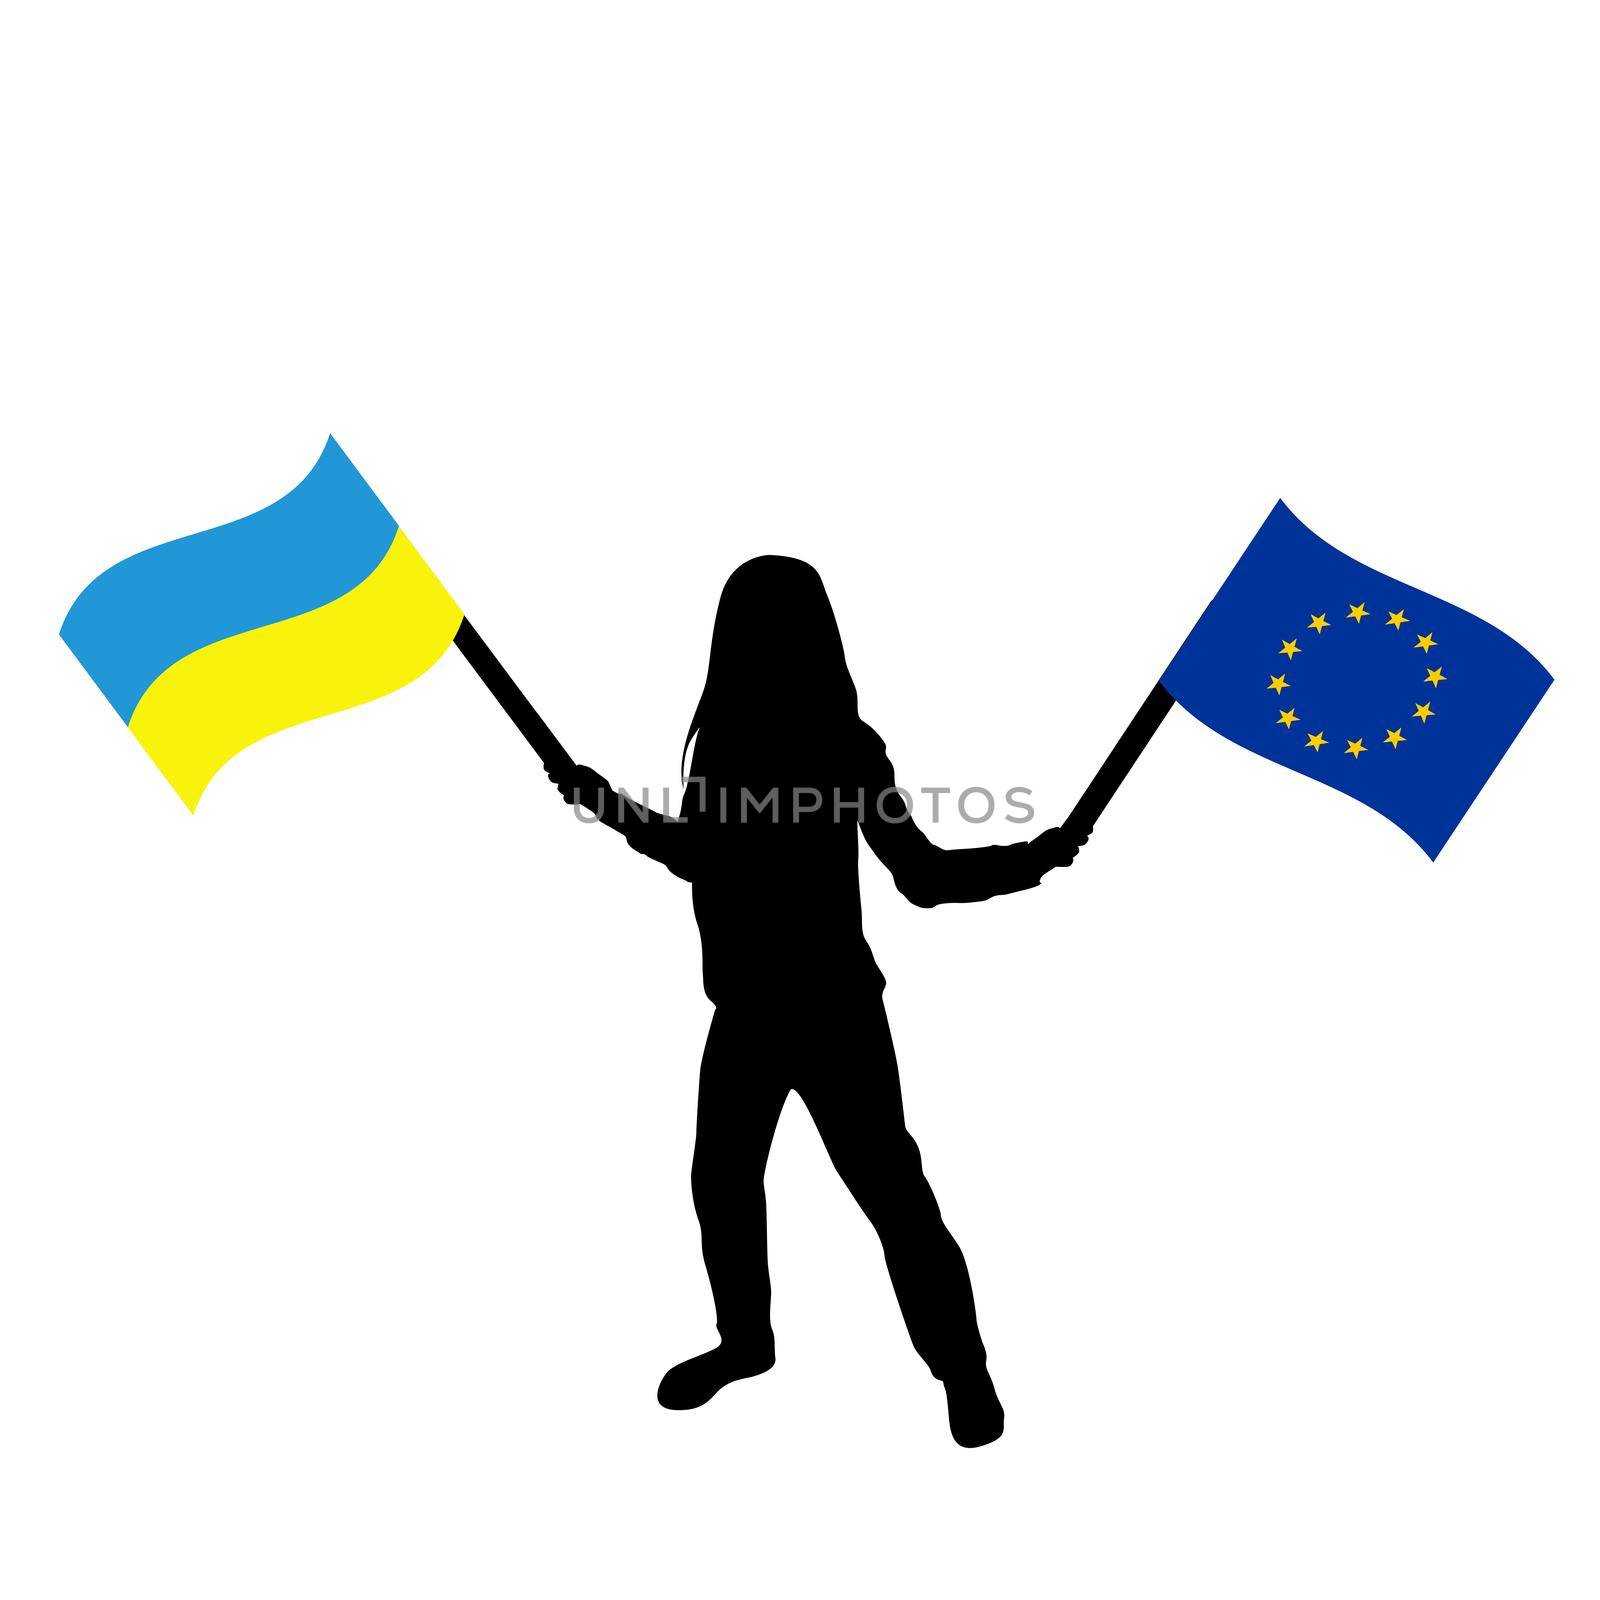 Ukraine and European Union concept with girl holding the Ukraine and European Union flags by hibrida13